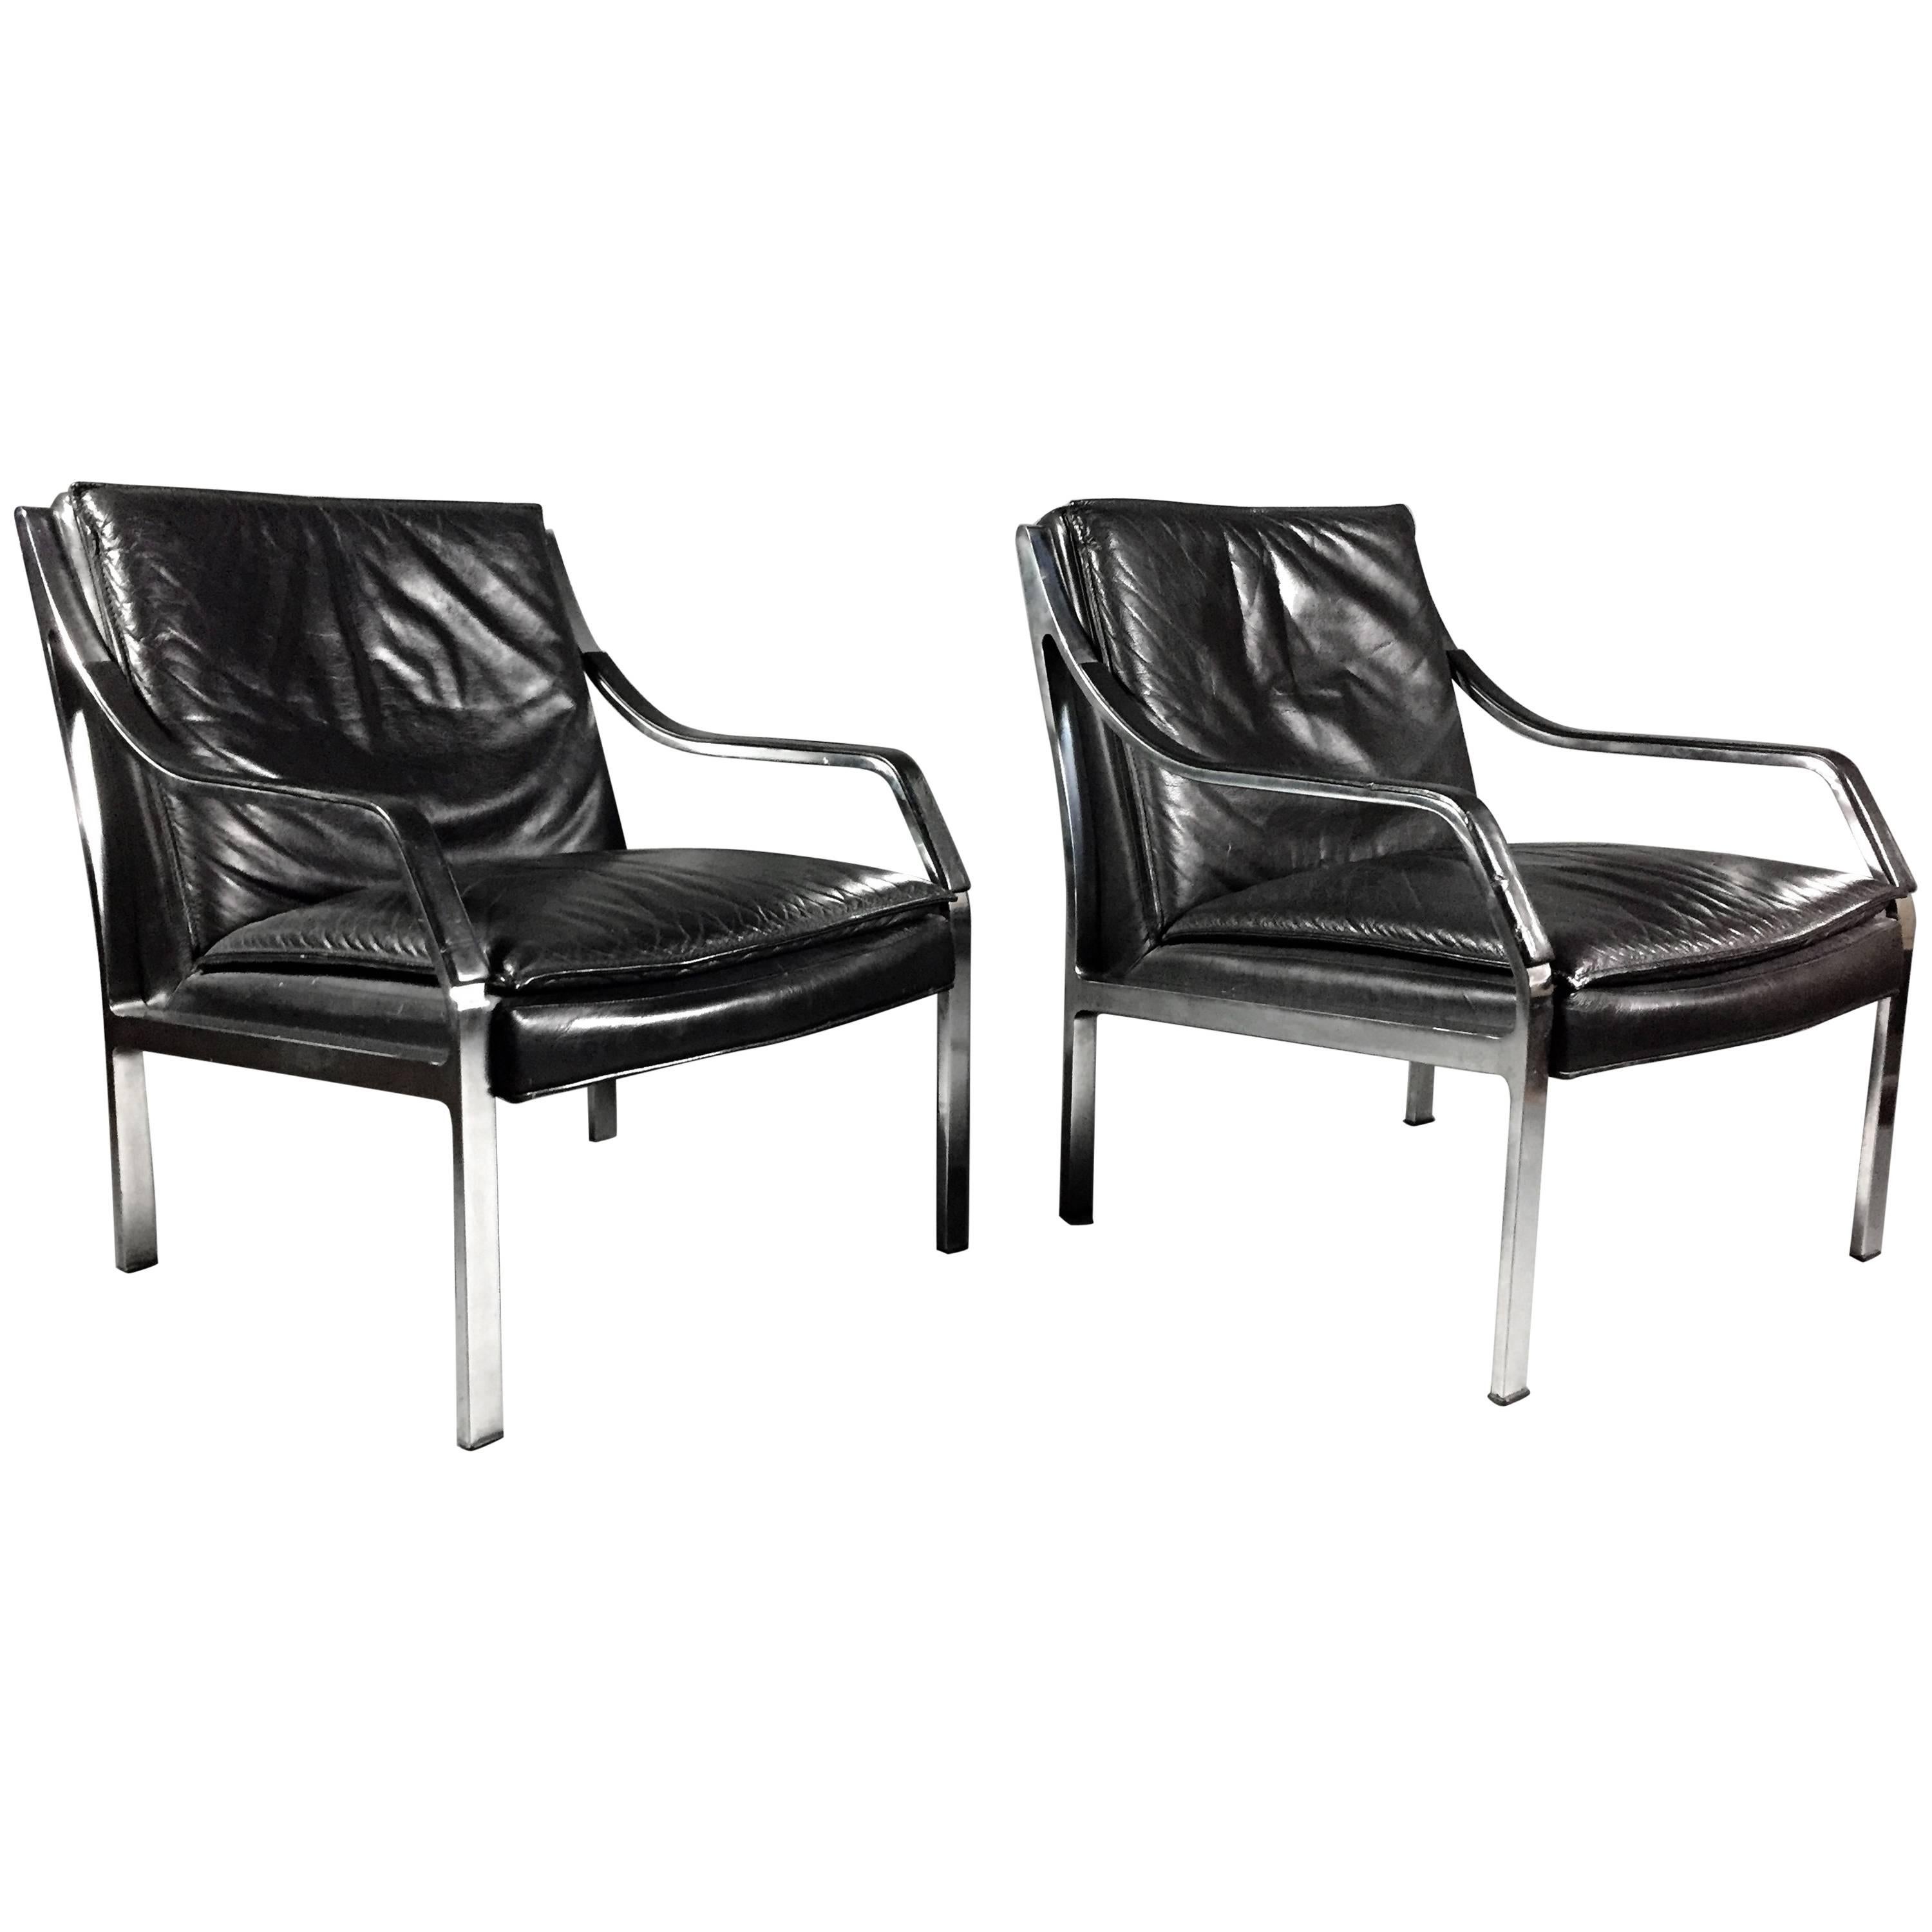 Pair of Preben Fabricius for Walter Knoll Armchairs, Germany, 1970s For Sale